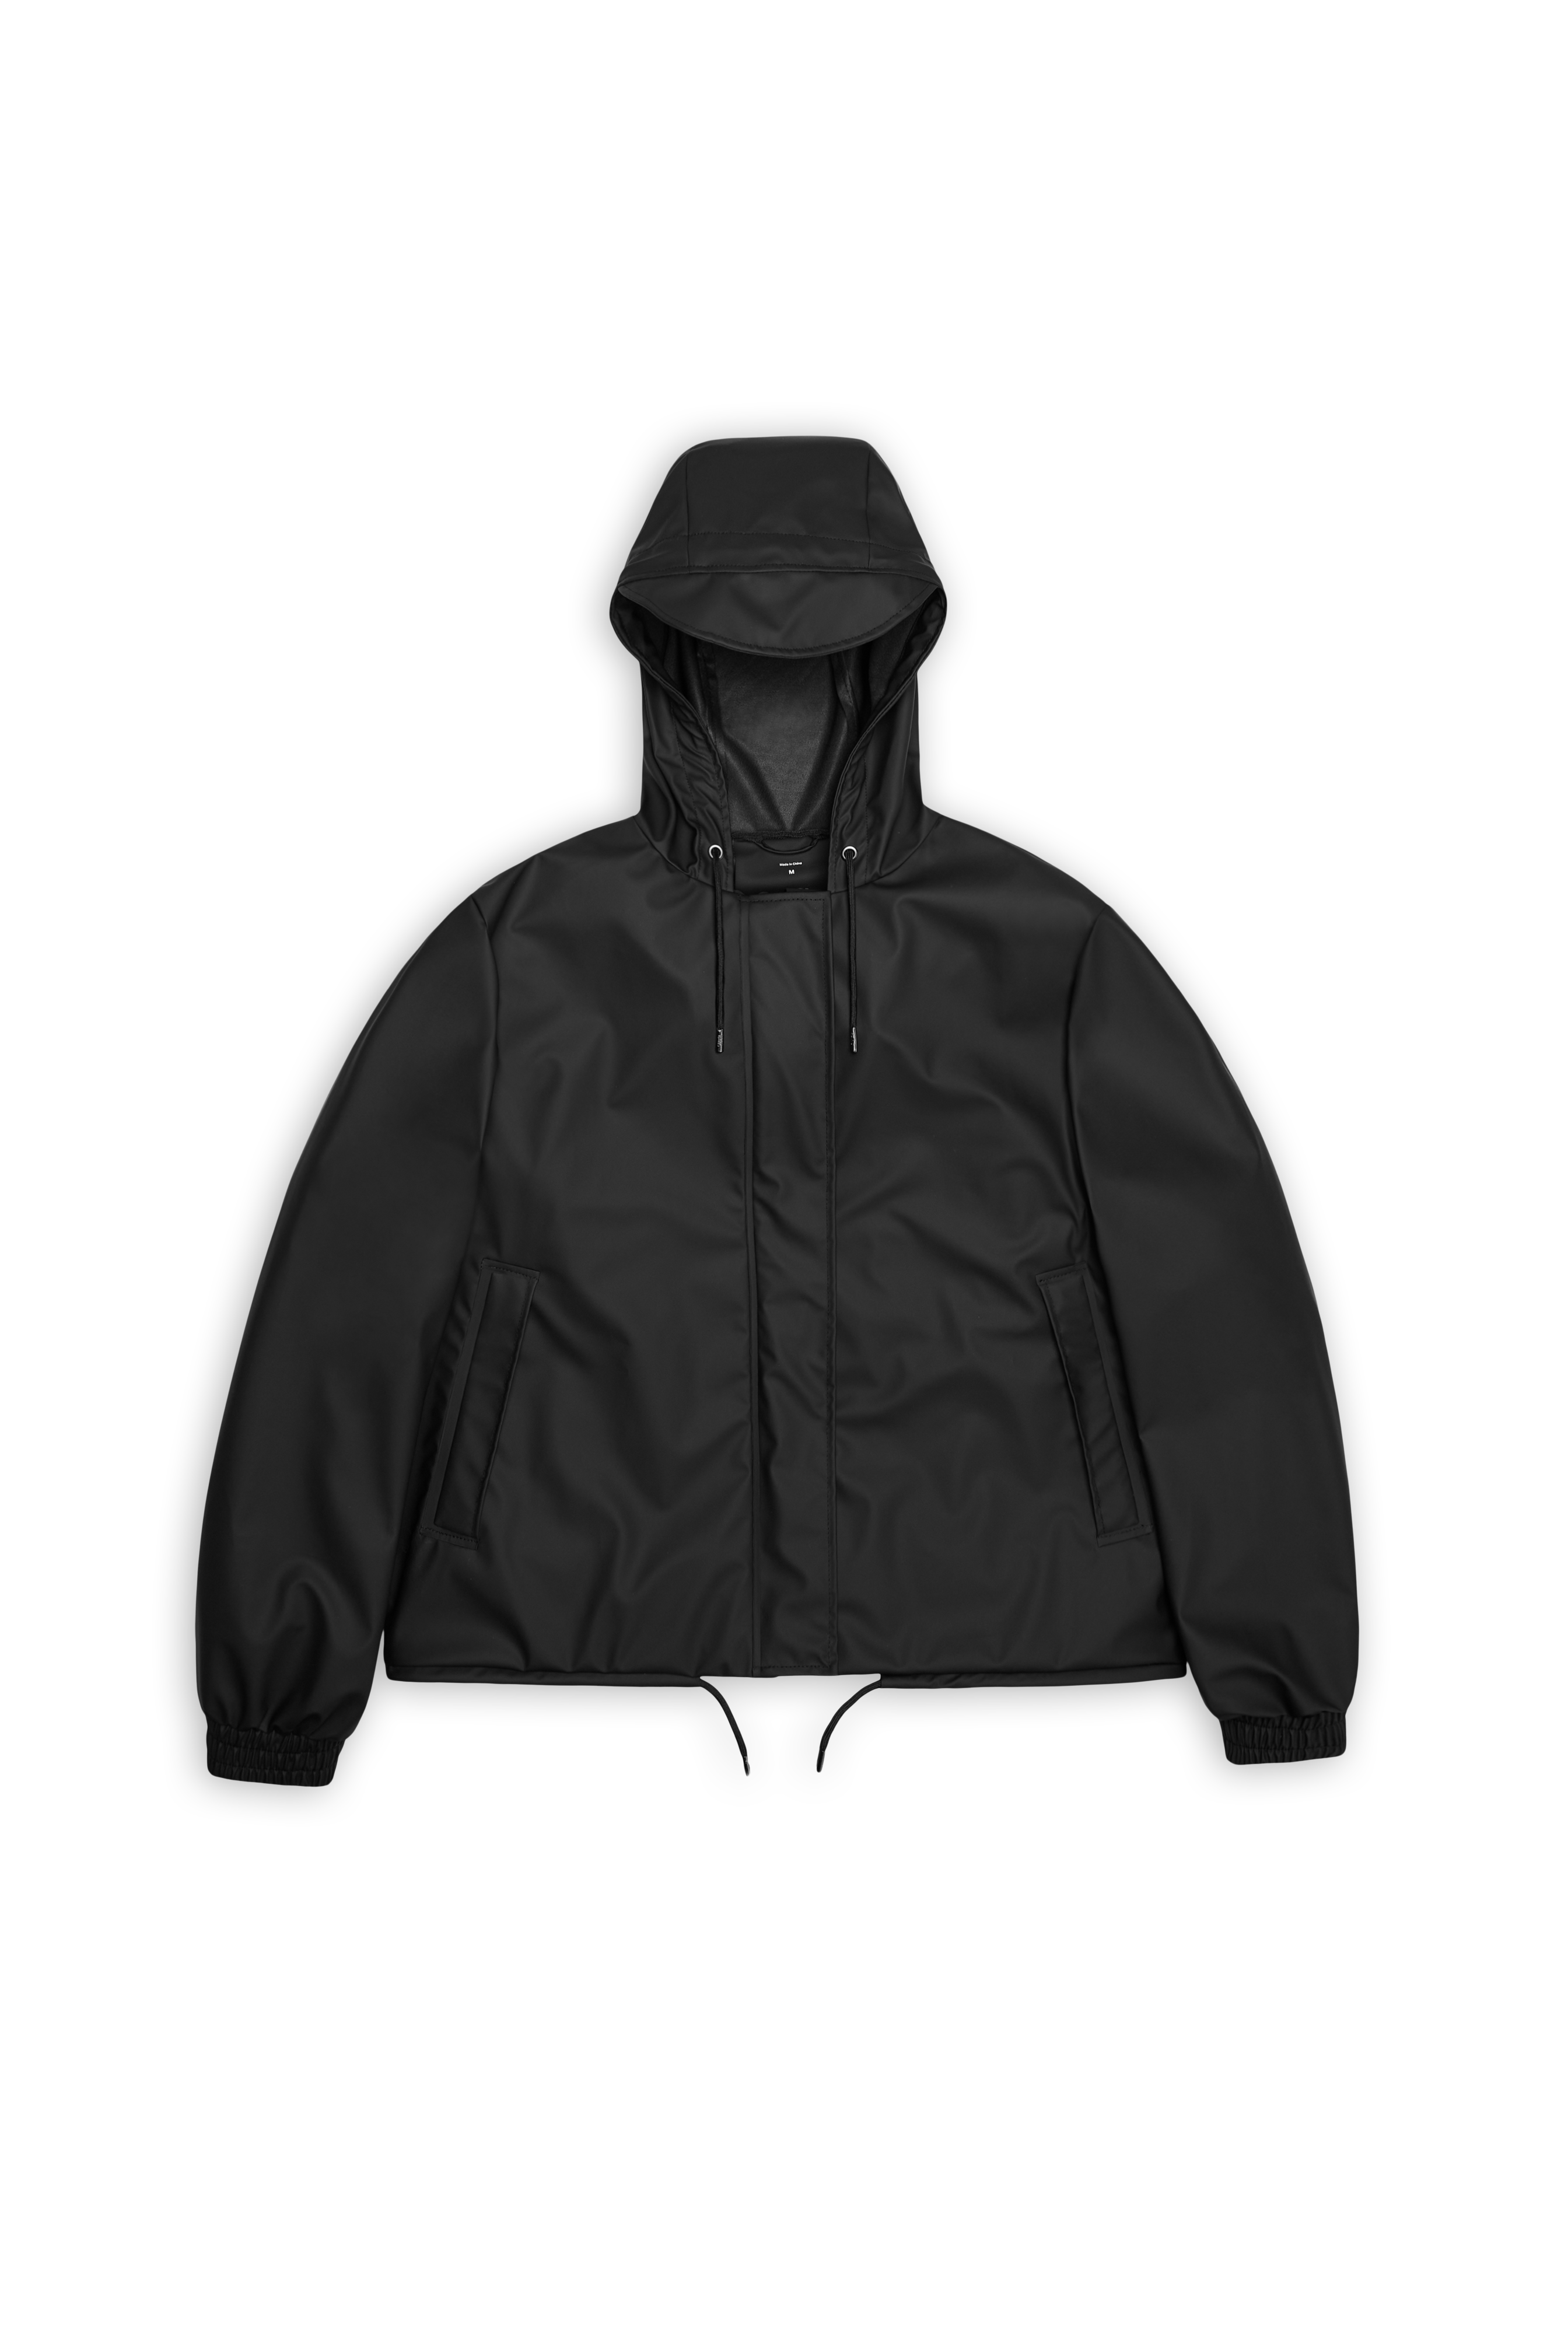 Rains® String W Jacket in Black for $140 | Free Shipping